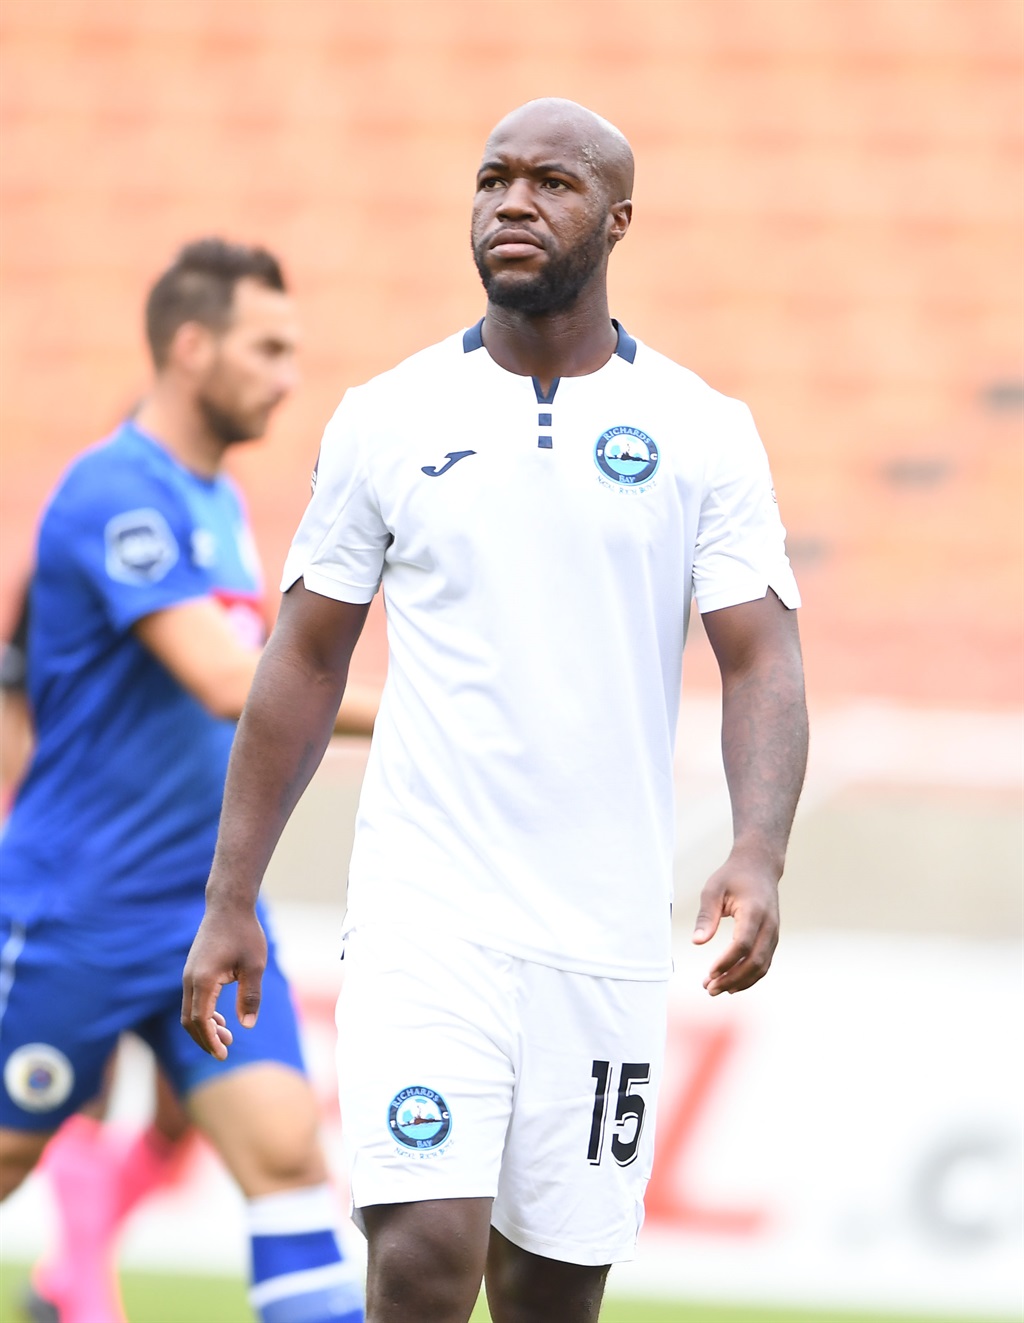 POLOKWANE, SOUTH AFRICA - AUGUST 05: Sakhile Hlongwa of Richards Bay during the DStv Premiership match between SuperSport United and Richards Bay at Peter Mokaba Stadium on August 05, 2023 in Polokwane, South Africa. (Photo by Philip Maeta/Gallo Images)